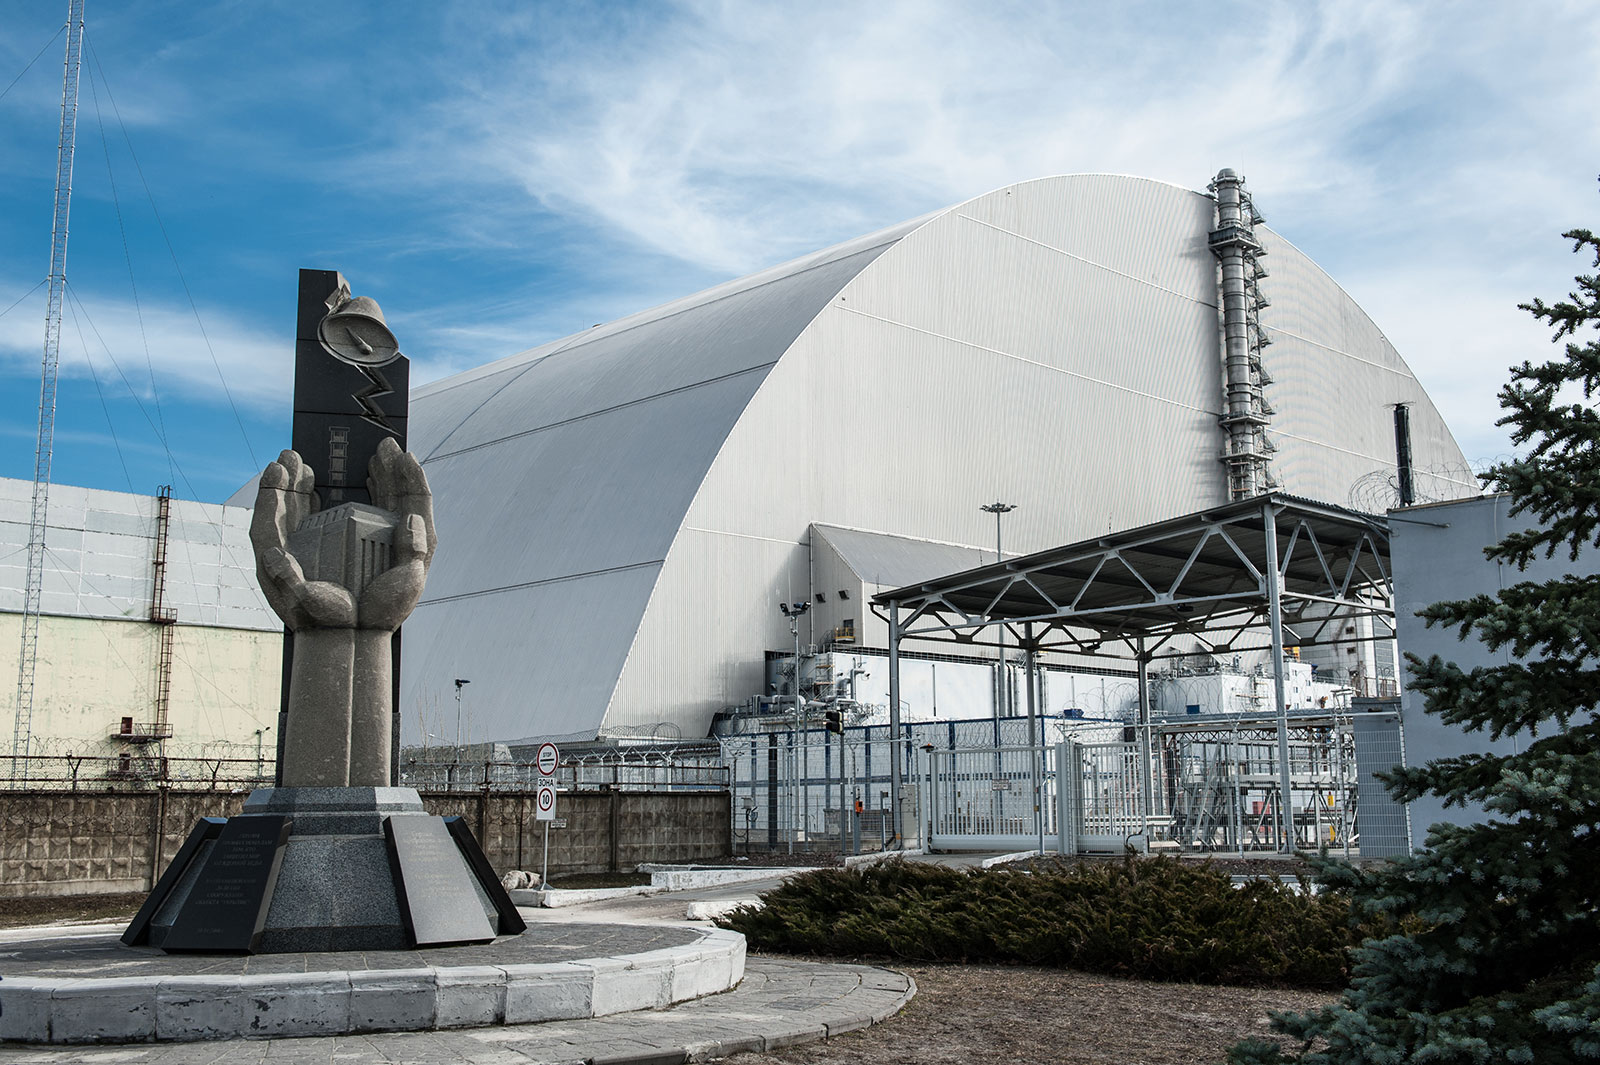 The New Safe Confinement (NSC or New Shelter) is a structure built to confine the remains of the number 4 reactor unit at the Chernobyl Nuclear Power Plant.